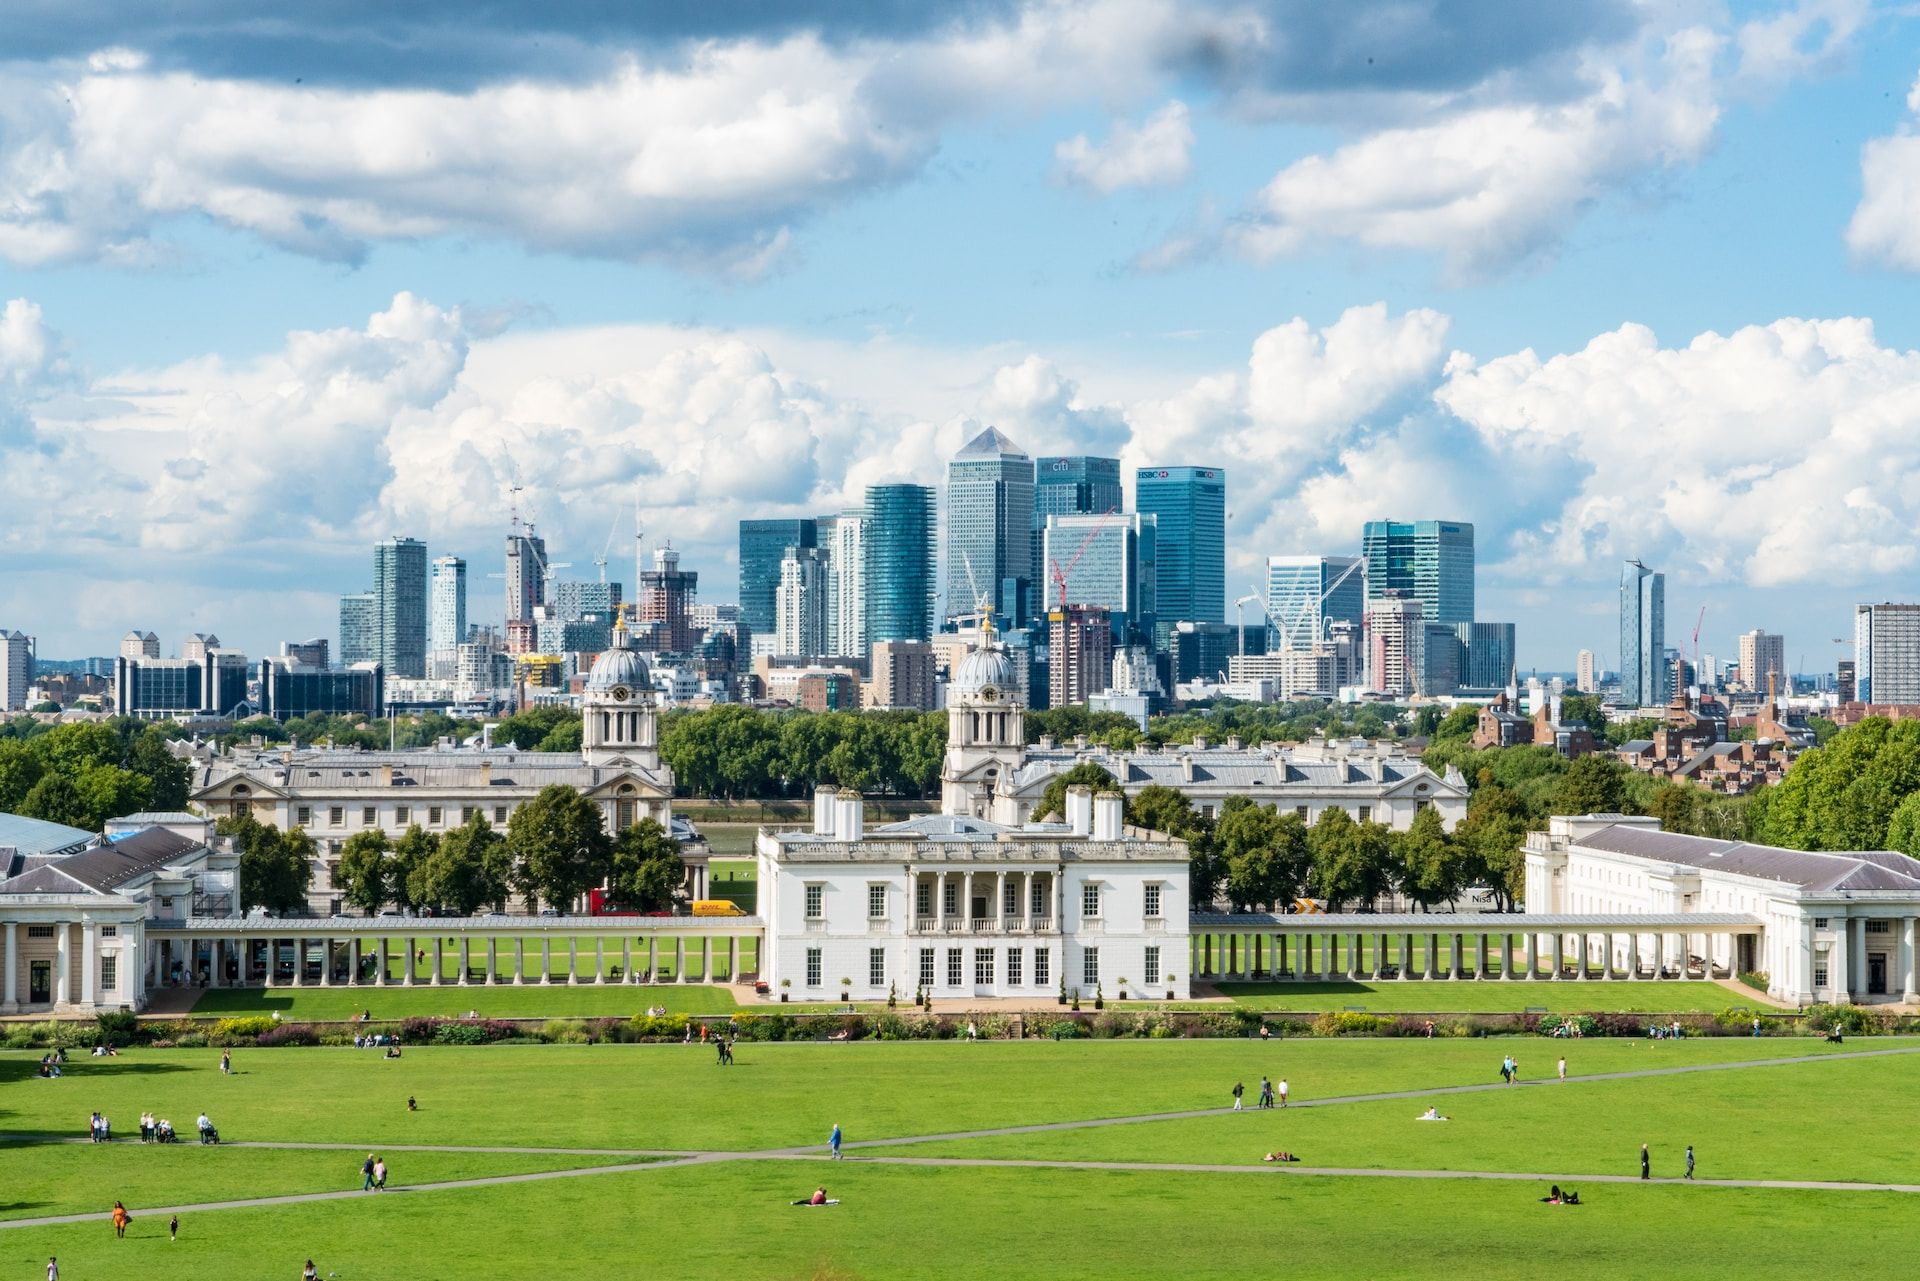 Greenwich College and tall buildings, including One Canada Square in the background, London 